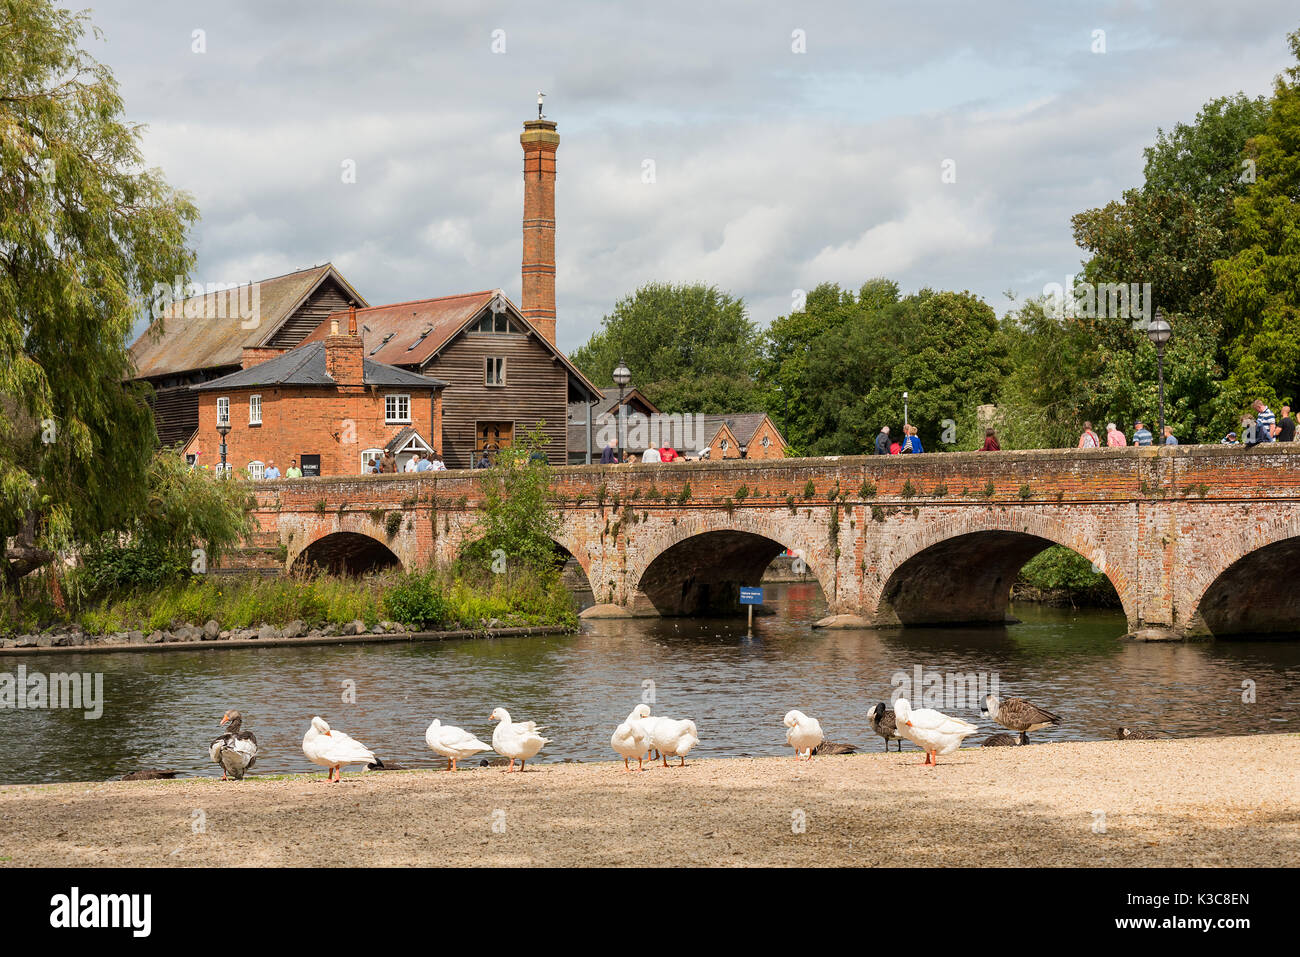 The Tramway bridge, Stratford upon avon crossing the river avon to the Cox's Yard Old wood mill building, and mute swans in the foreground. Stock Photo